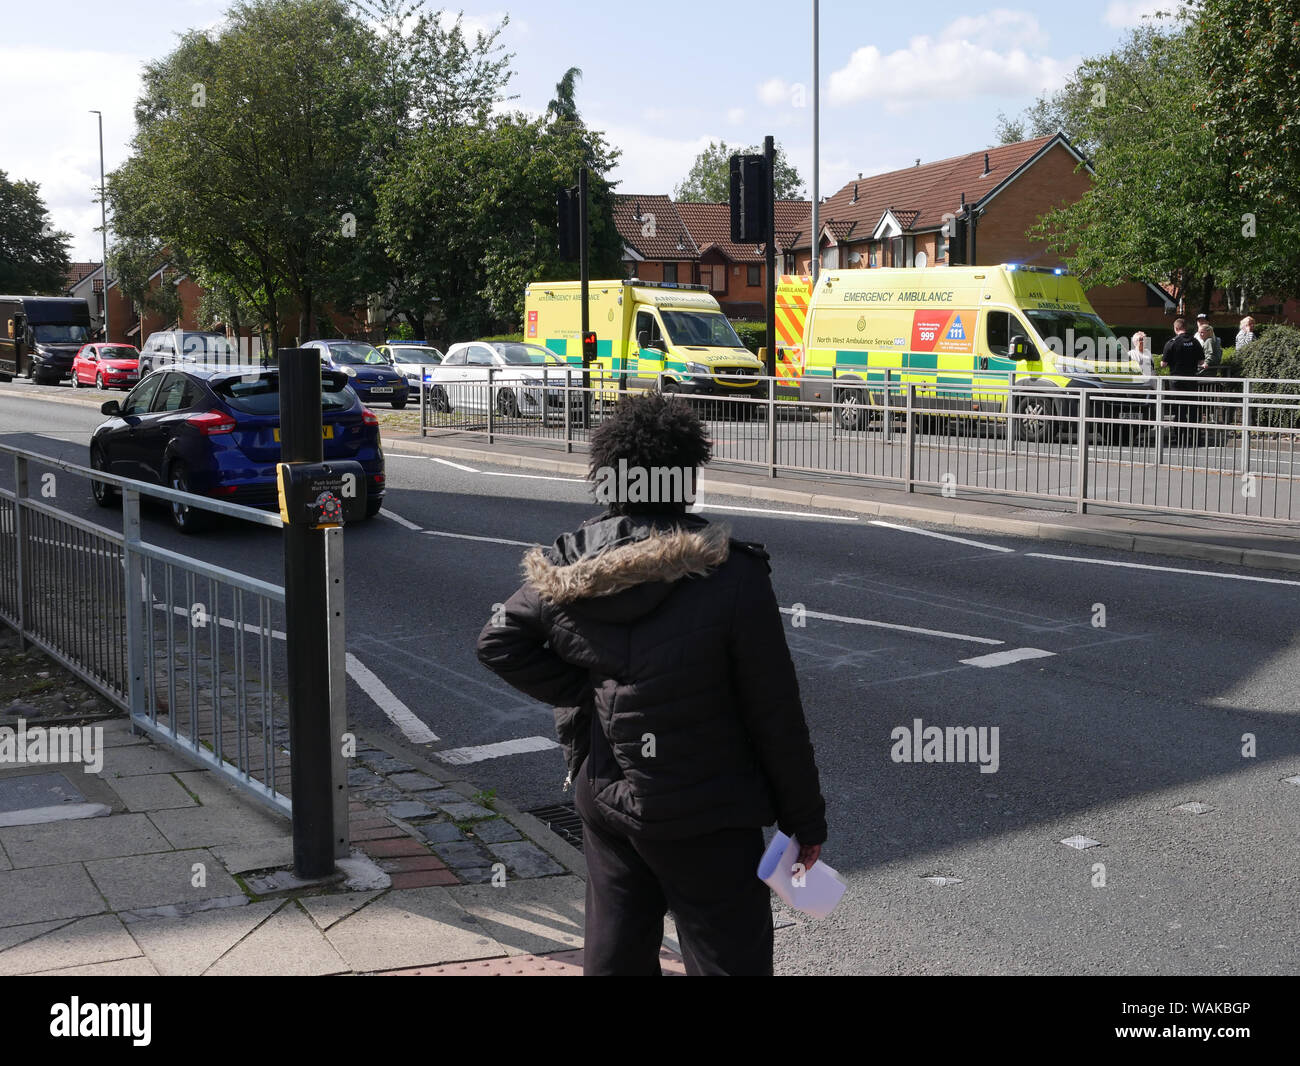 Ambulances at an accident scene on a pedestrian crossing on a dual carriageway, Topp Way, Bolton, Lancashire, England UK. photo DON TONGE Stock Photo